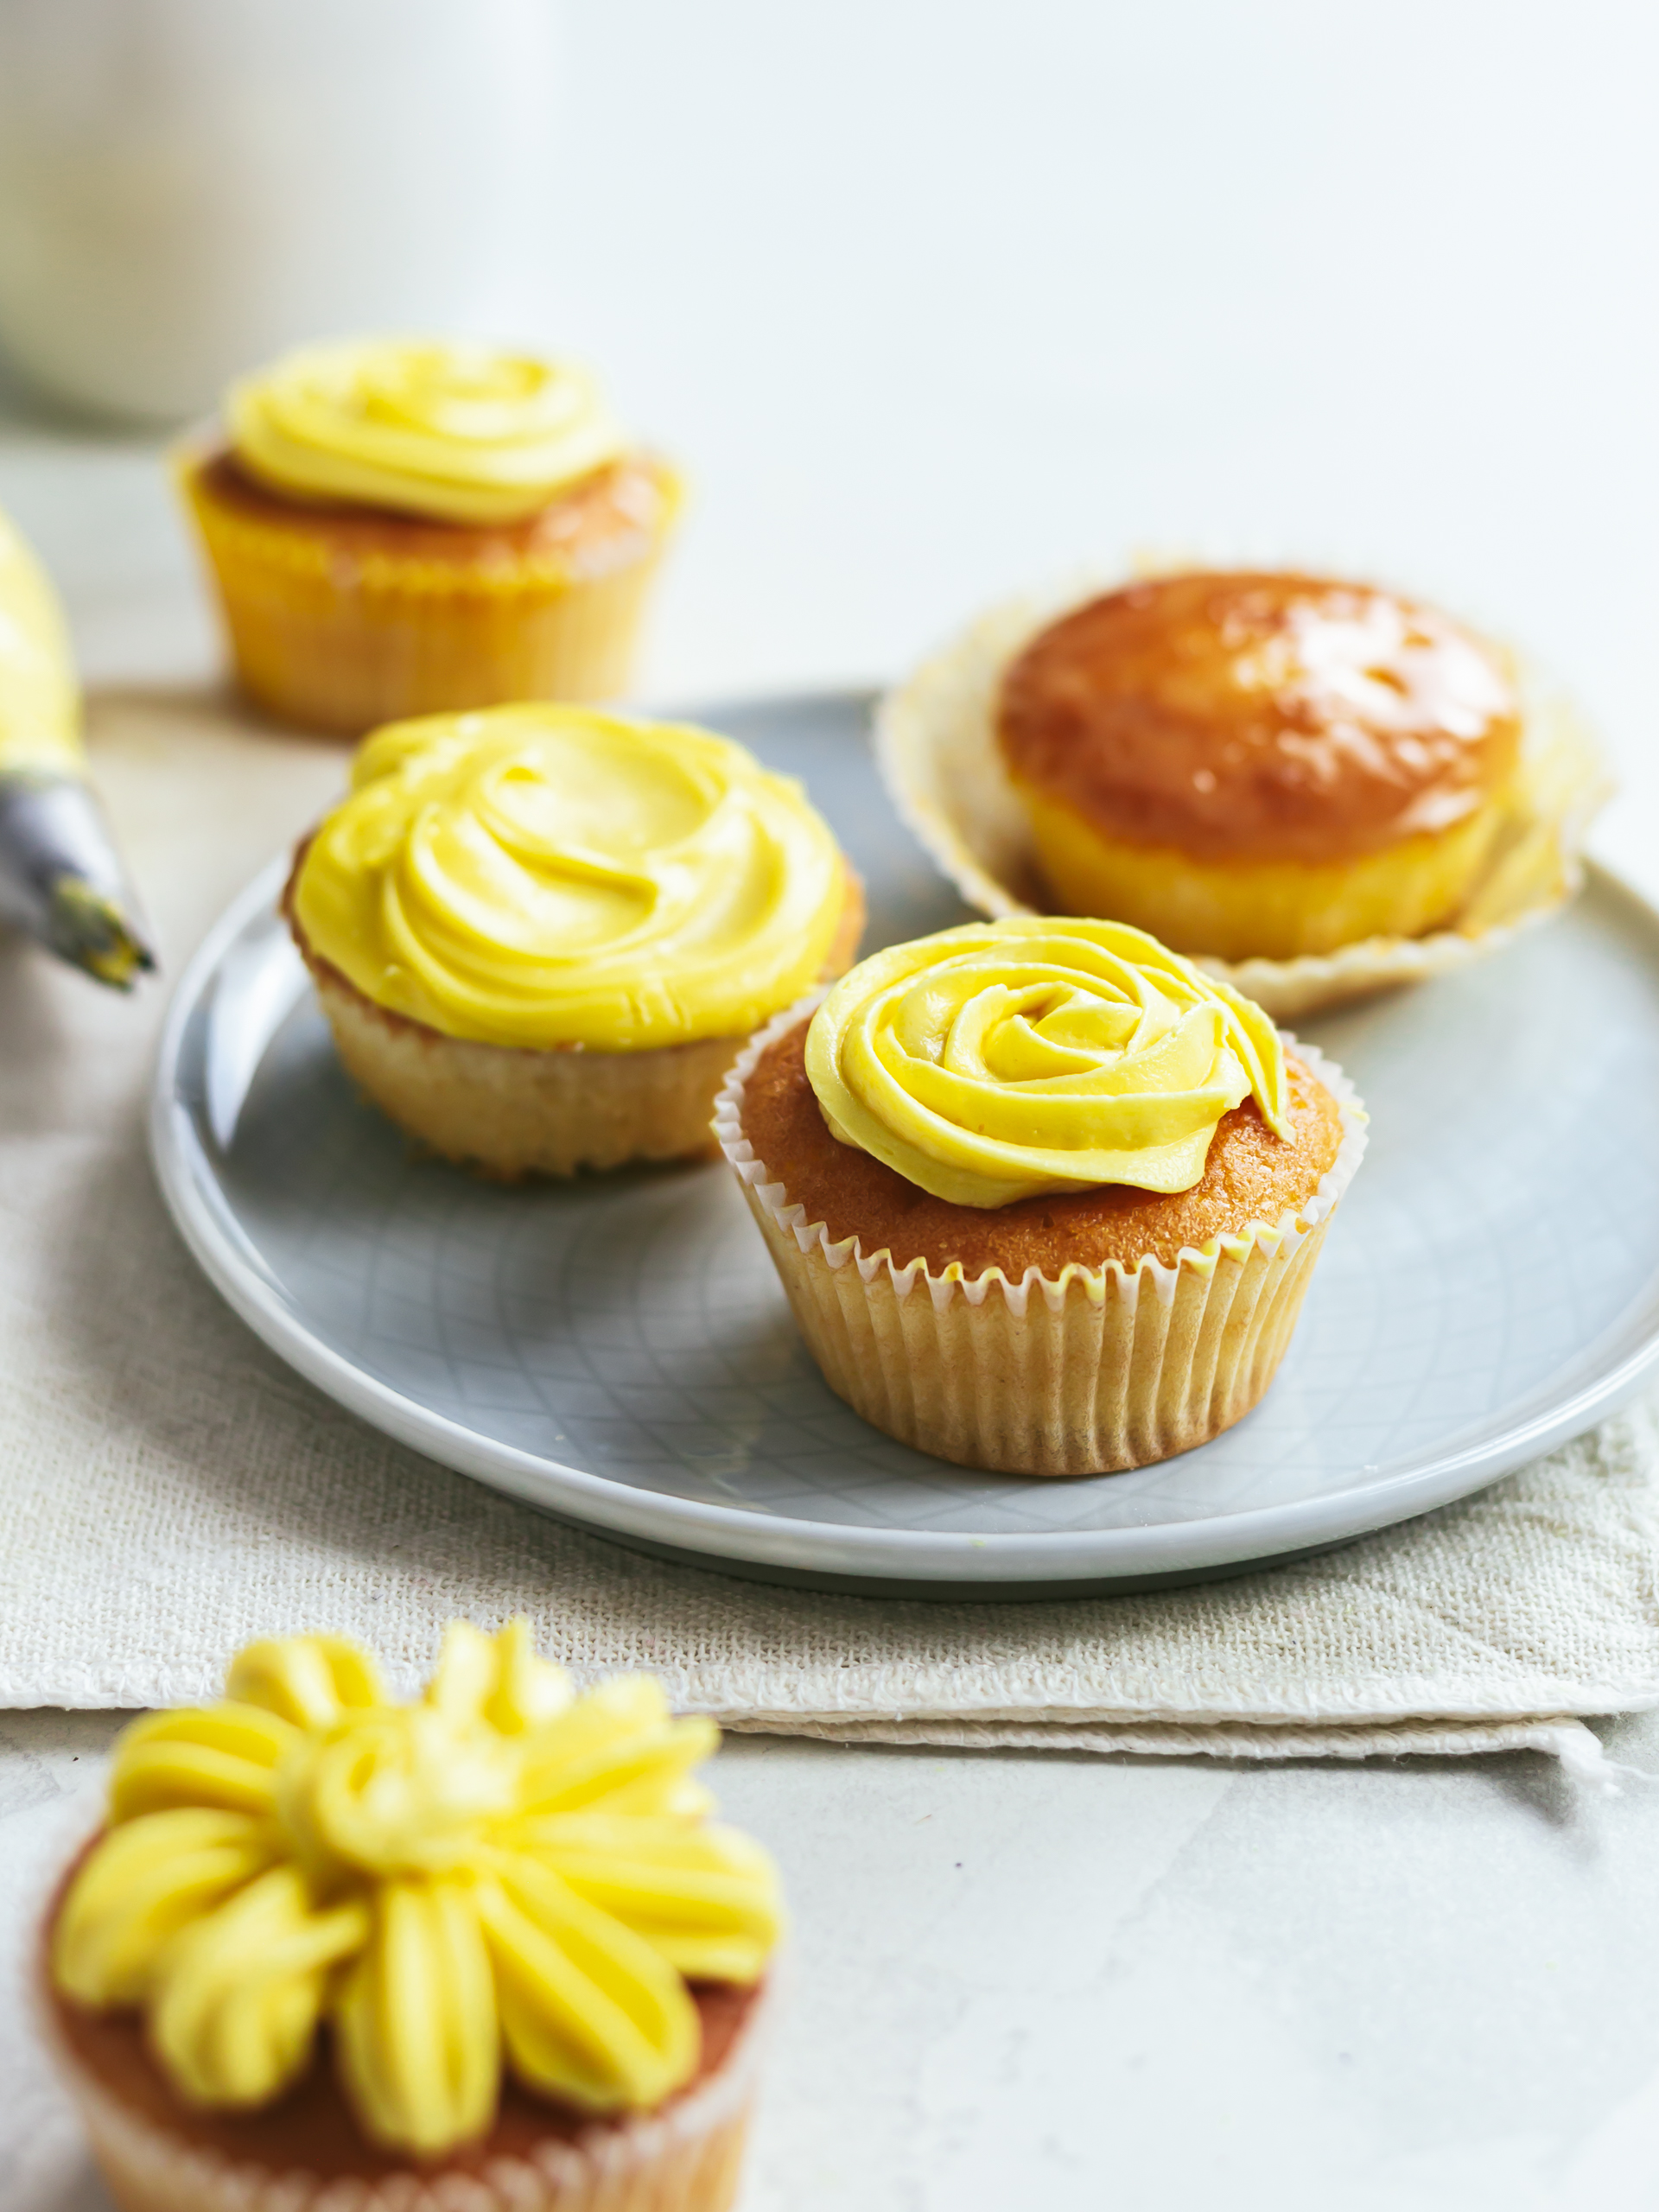 cupcakes with piped lemon ganache